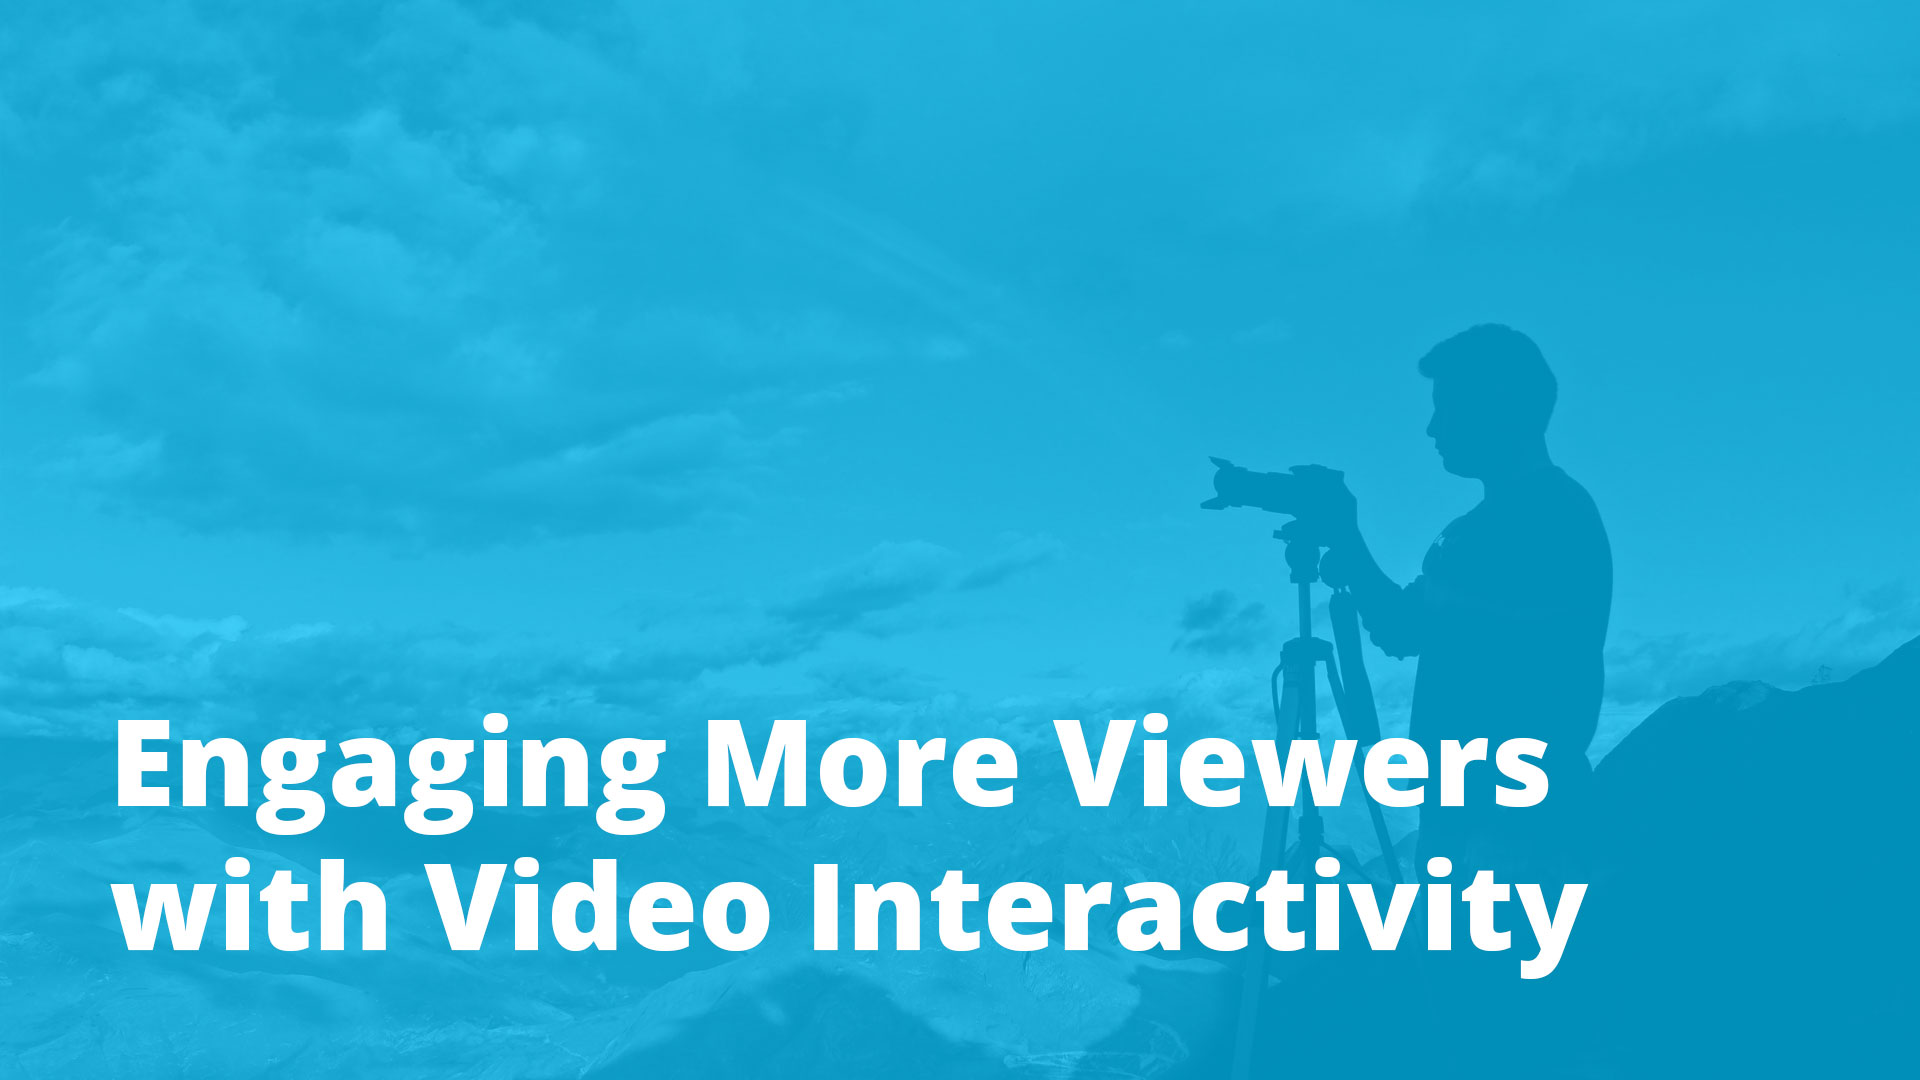 Engaging more viewers with video interactivity